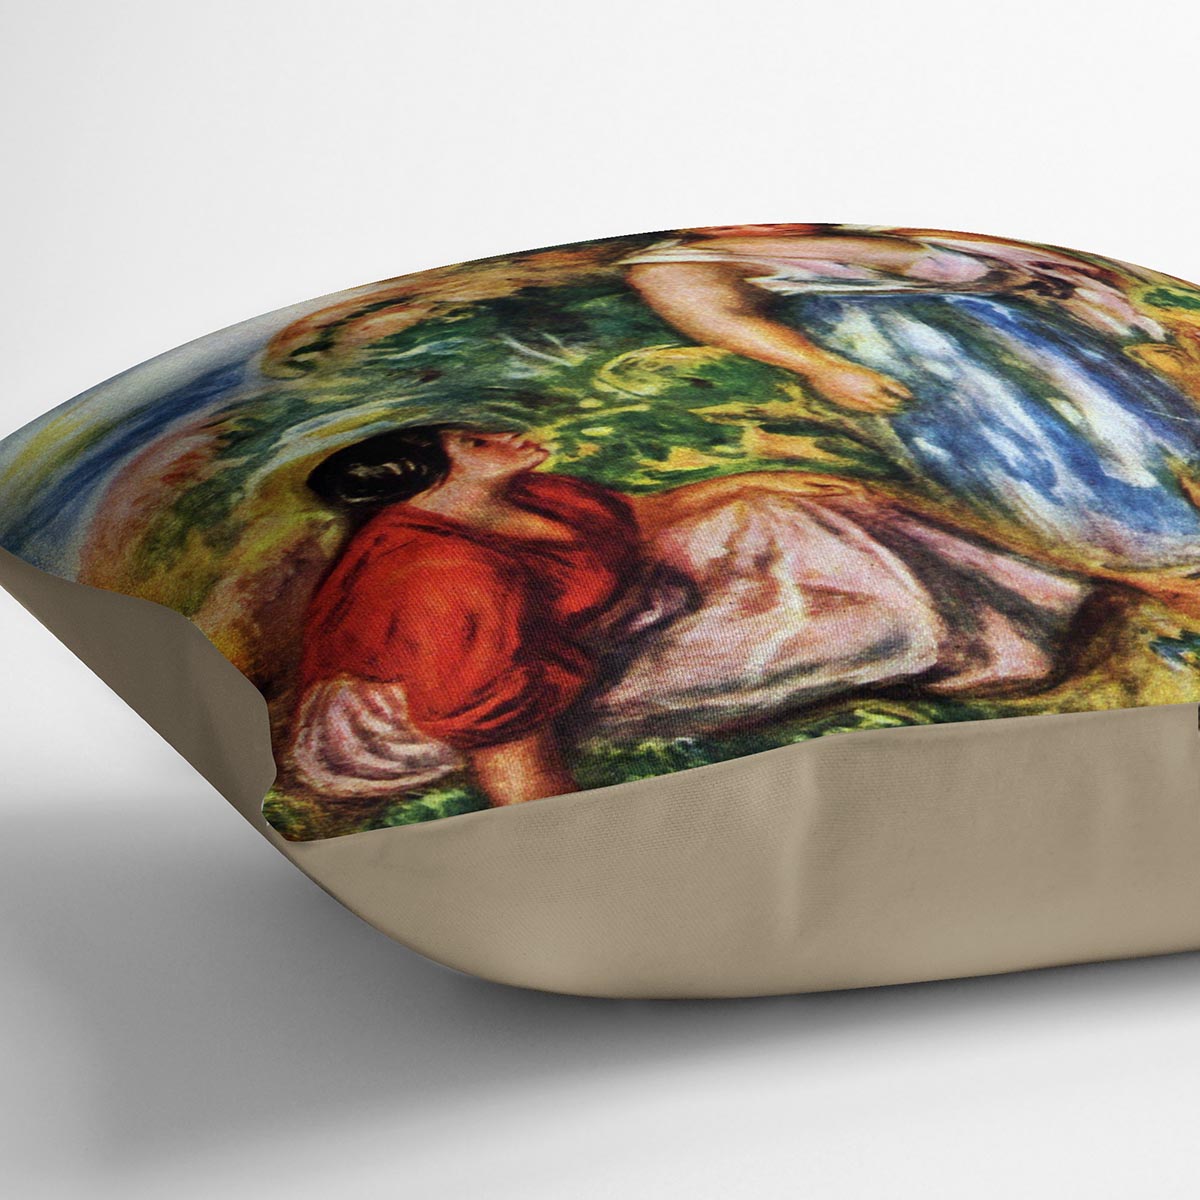 Two women with young girls in a landscape by Renoir Cushion